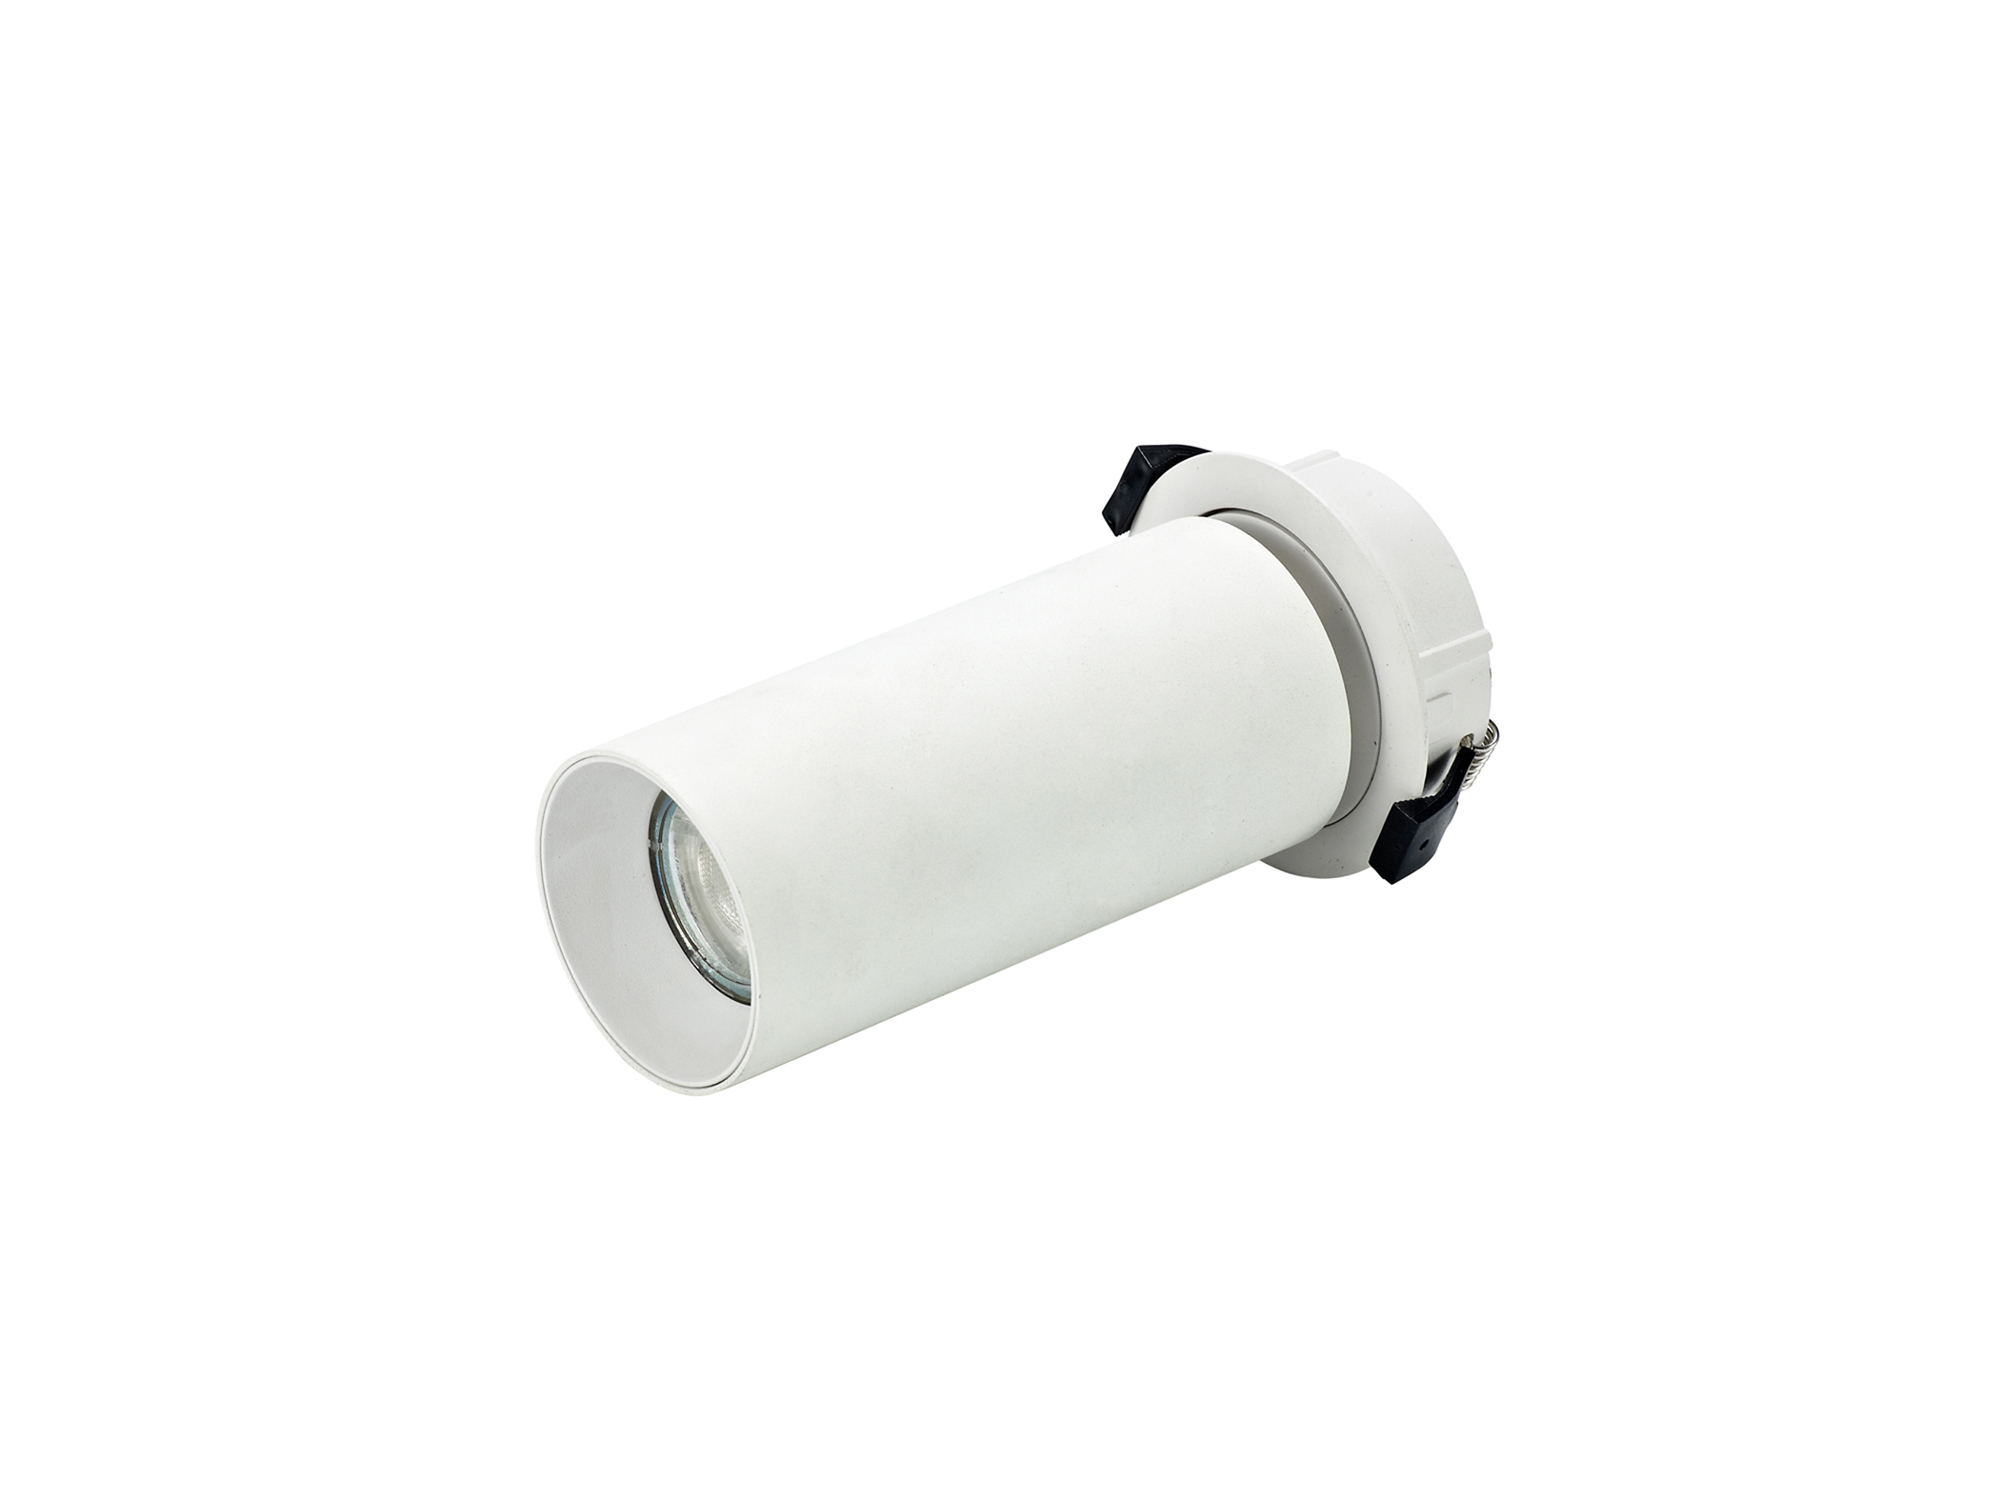 DX160007  Eos A 10; GU10/LED Module; White & White; Recessed Base LED Spotlight; Push Fit Fast Connector; IP20; 5yrs Warranty